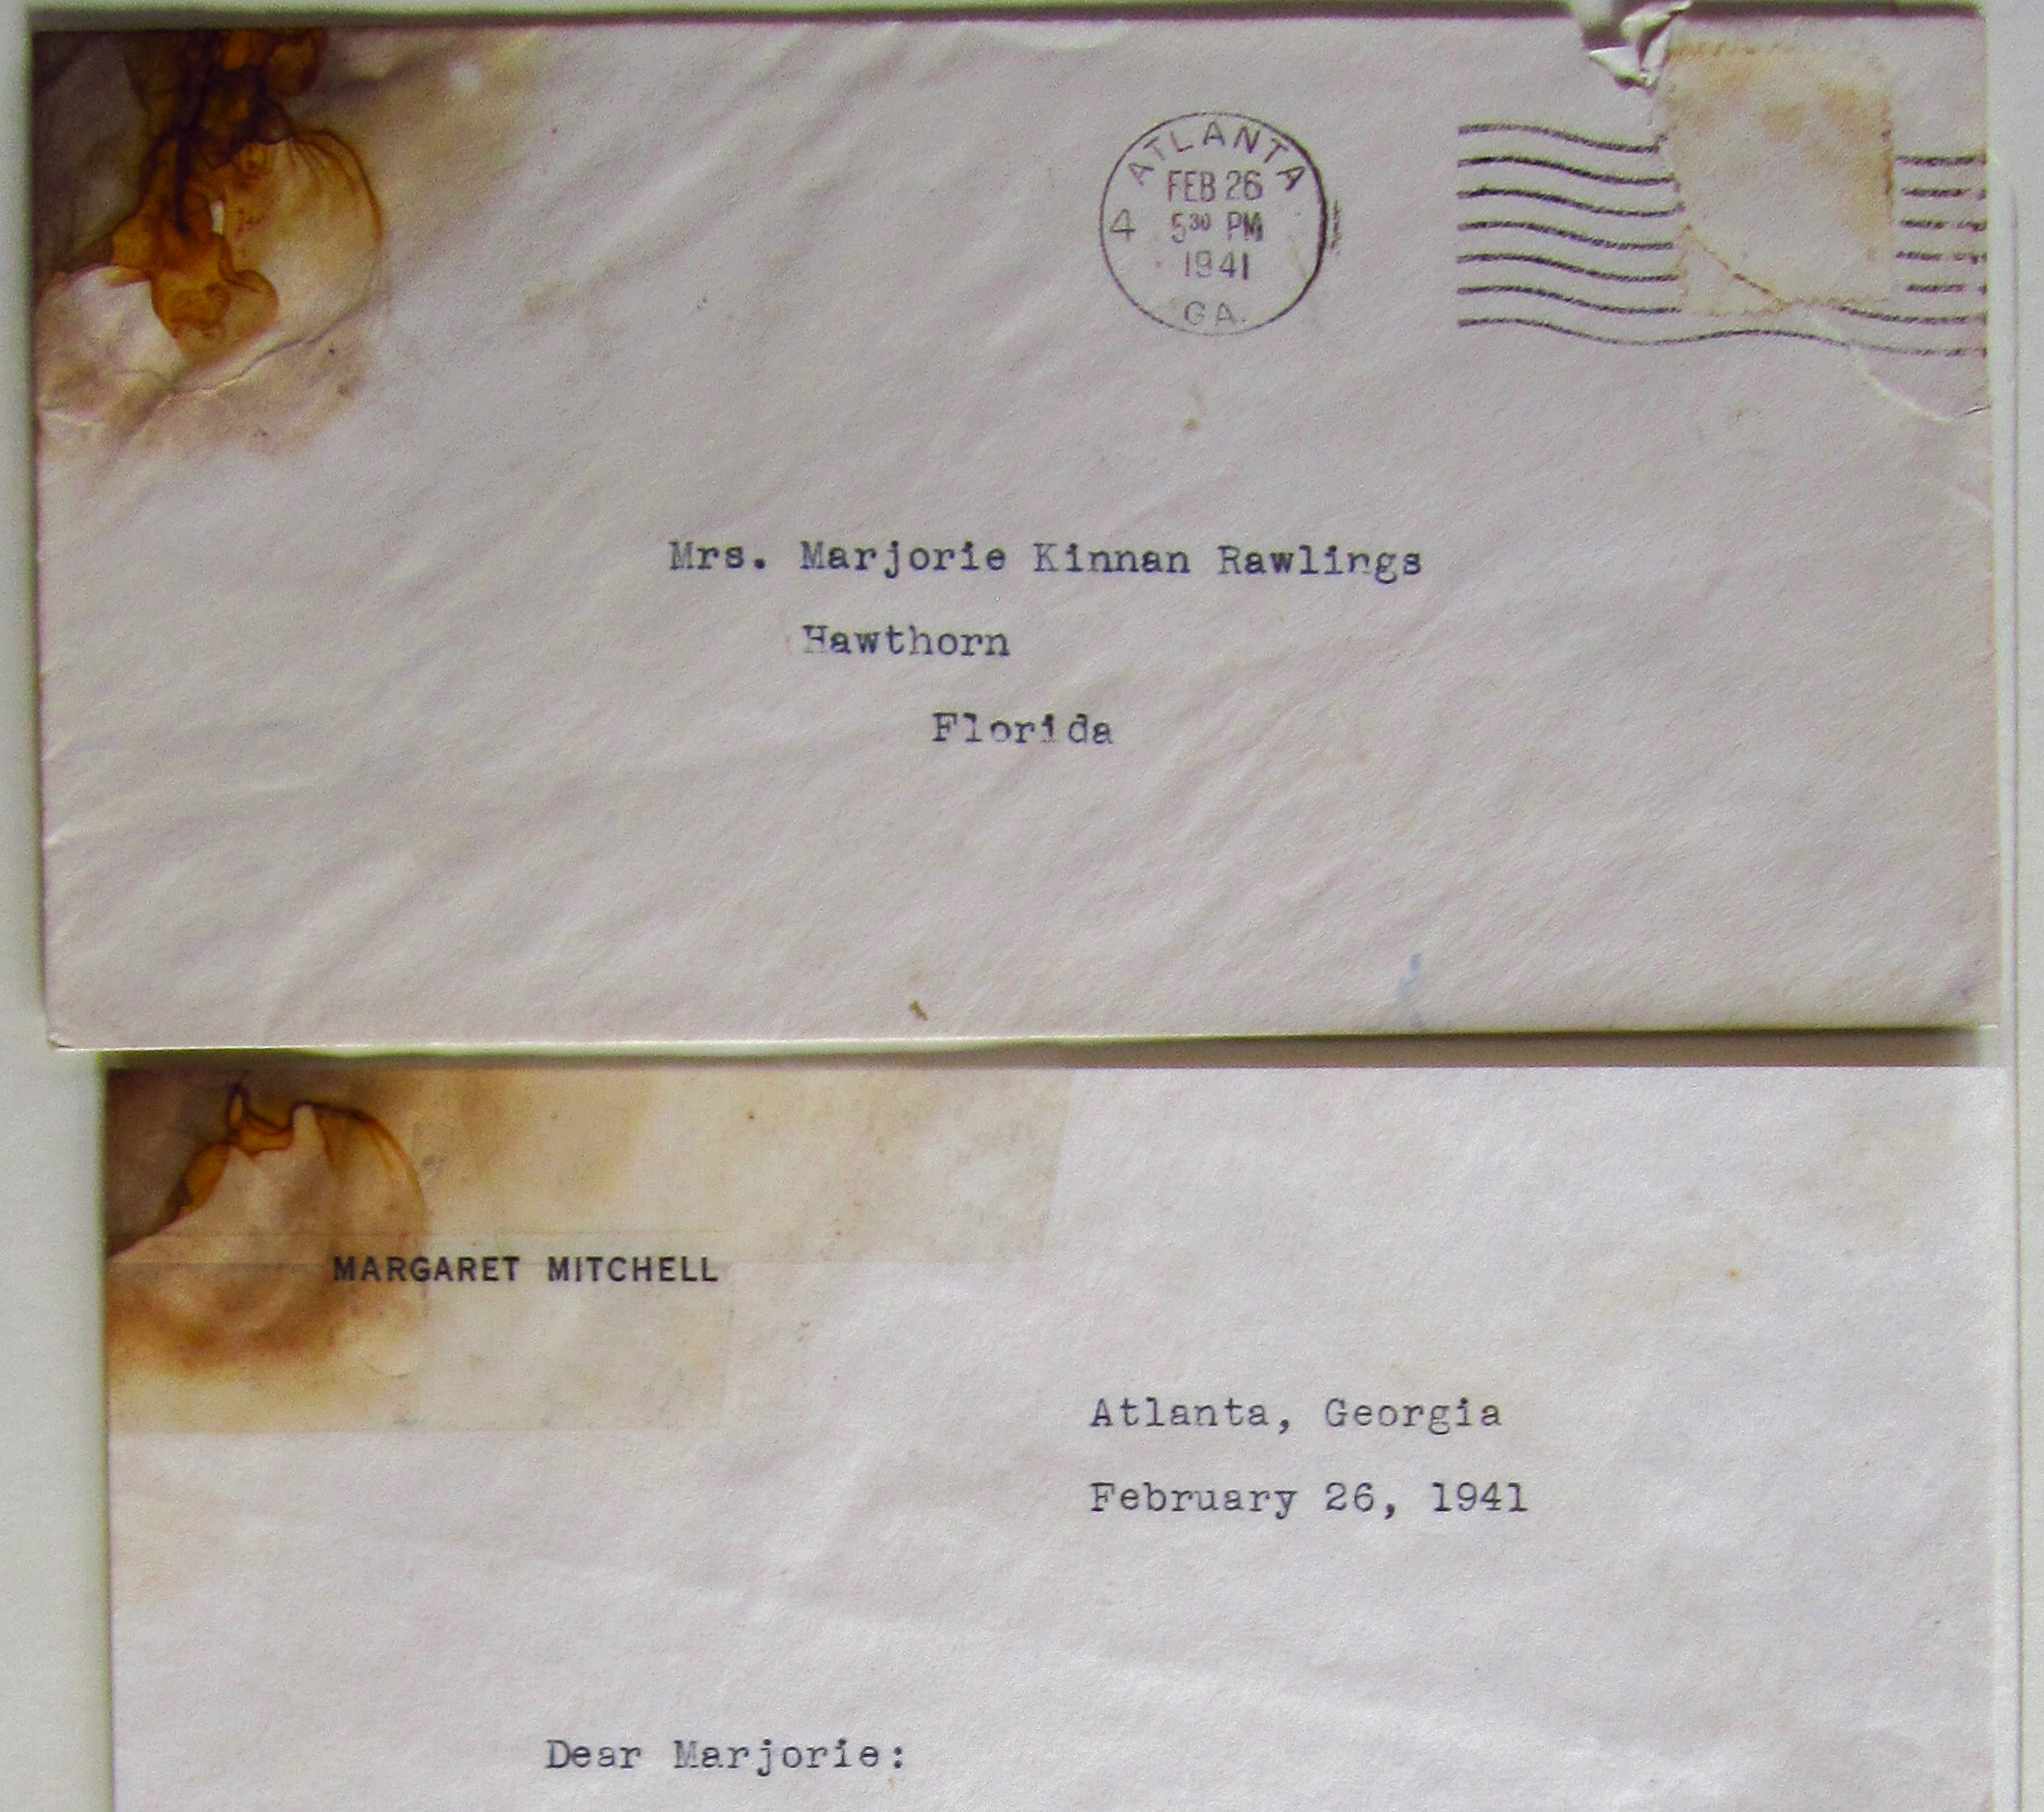 Envelope and stationery of a letter from Margaret Mitchell to Marjorie Kinnan Rawlings, 1941.